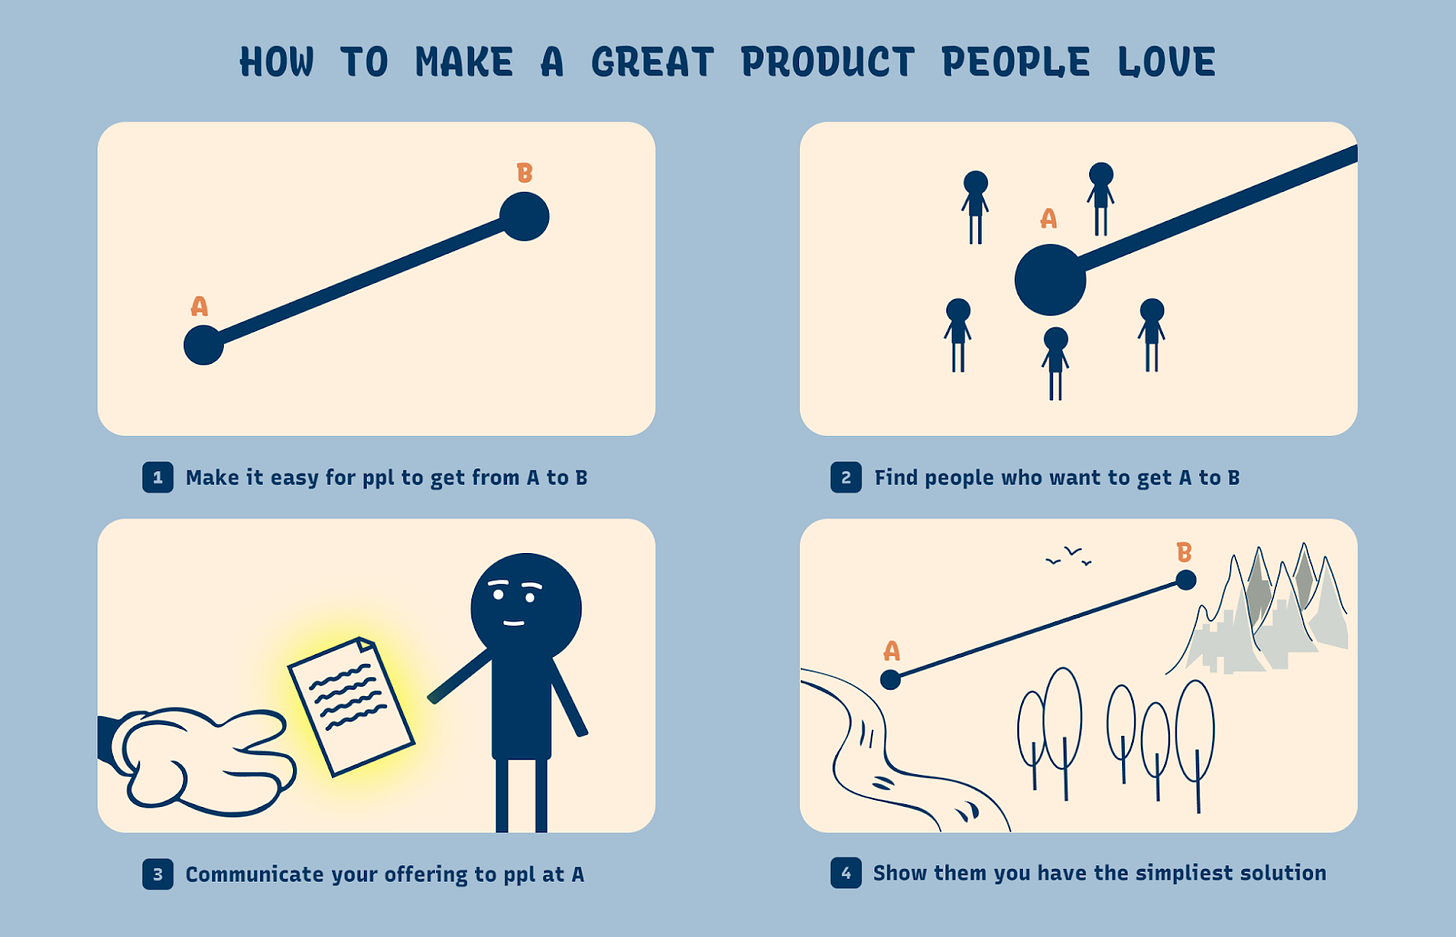 How to make a great product, inspired by David Miranda 